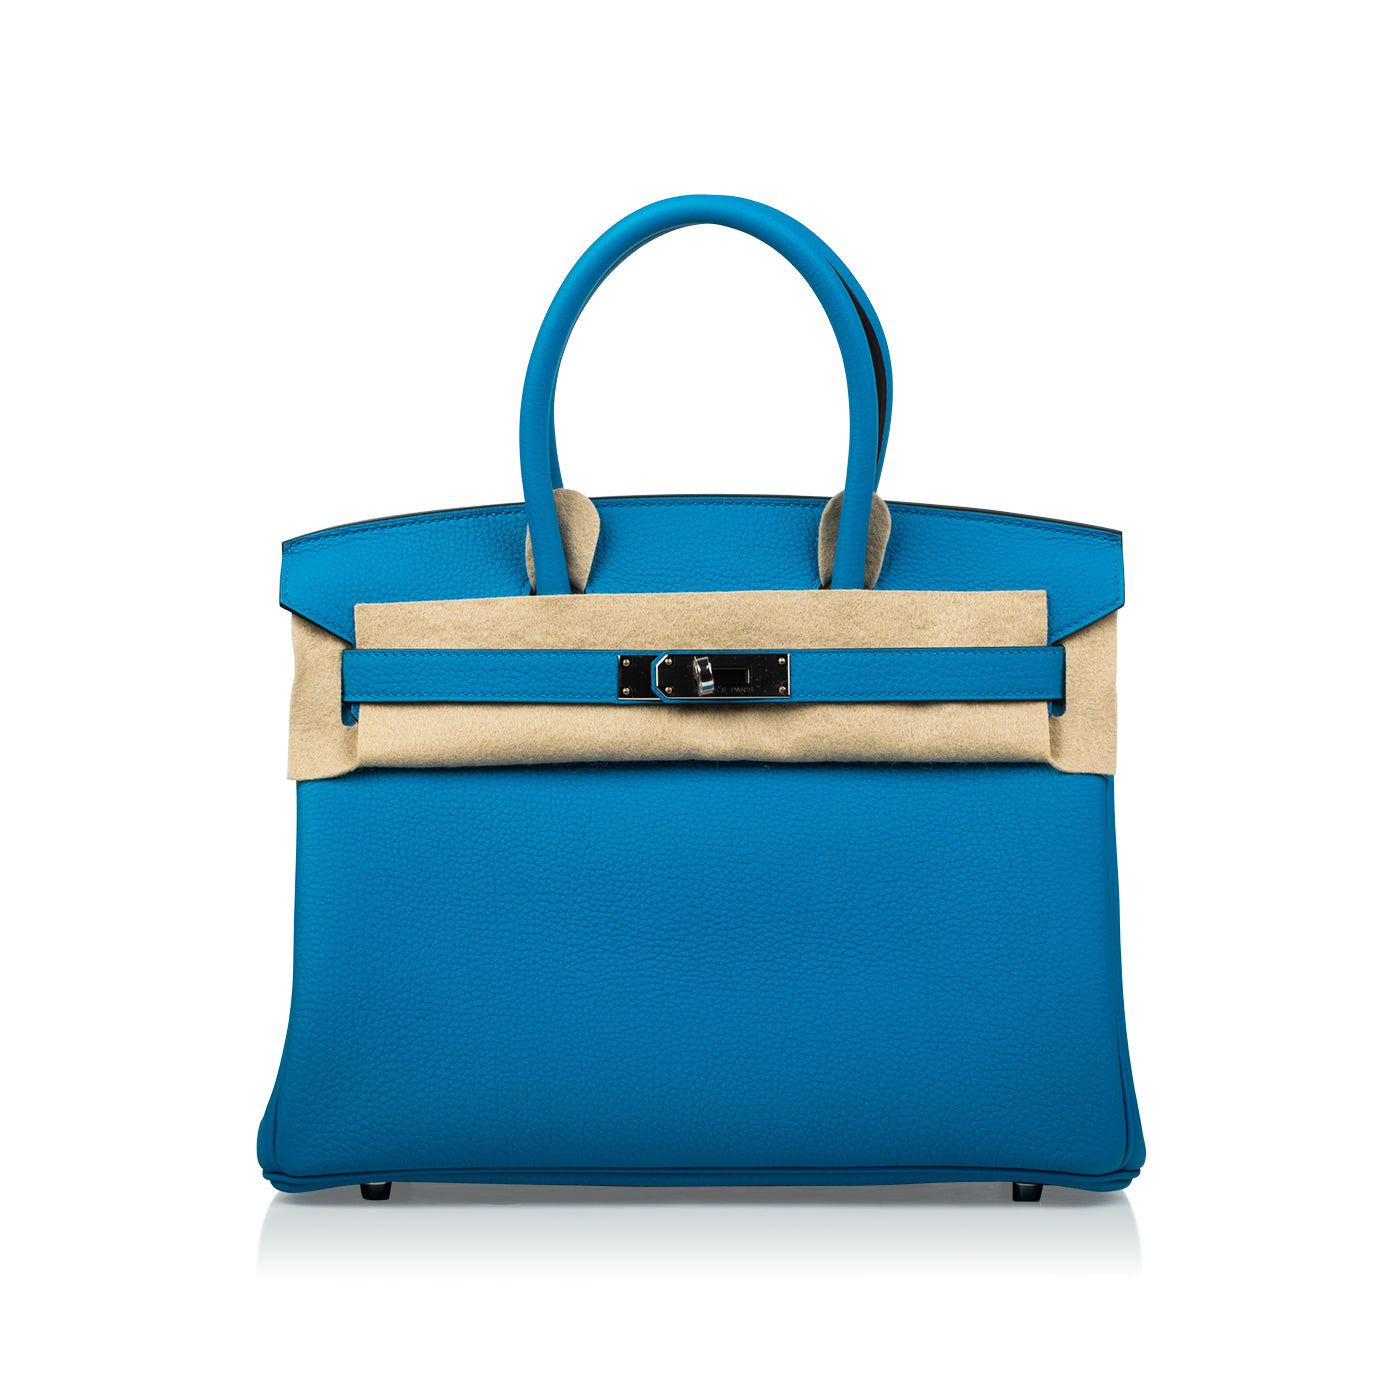 Ginza Xiaoma - New In: ✨Brand New✨ Blue Nuit Birkin 30 in